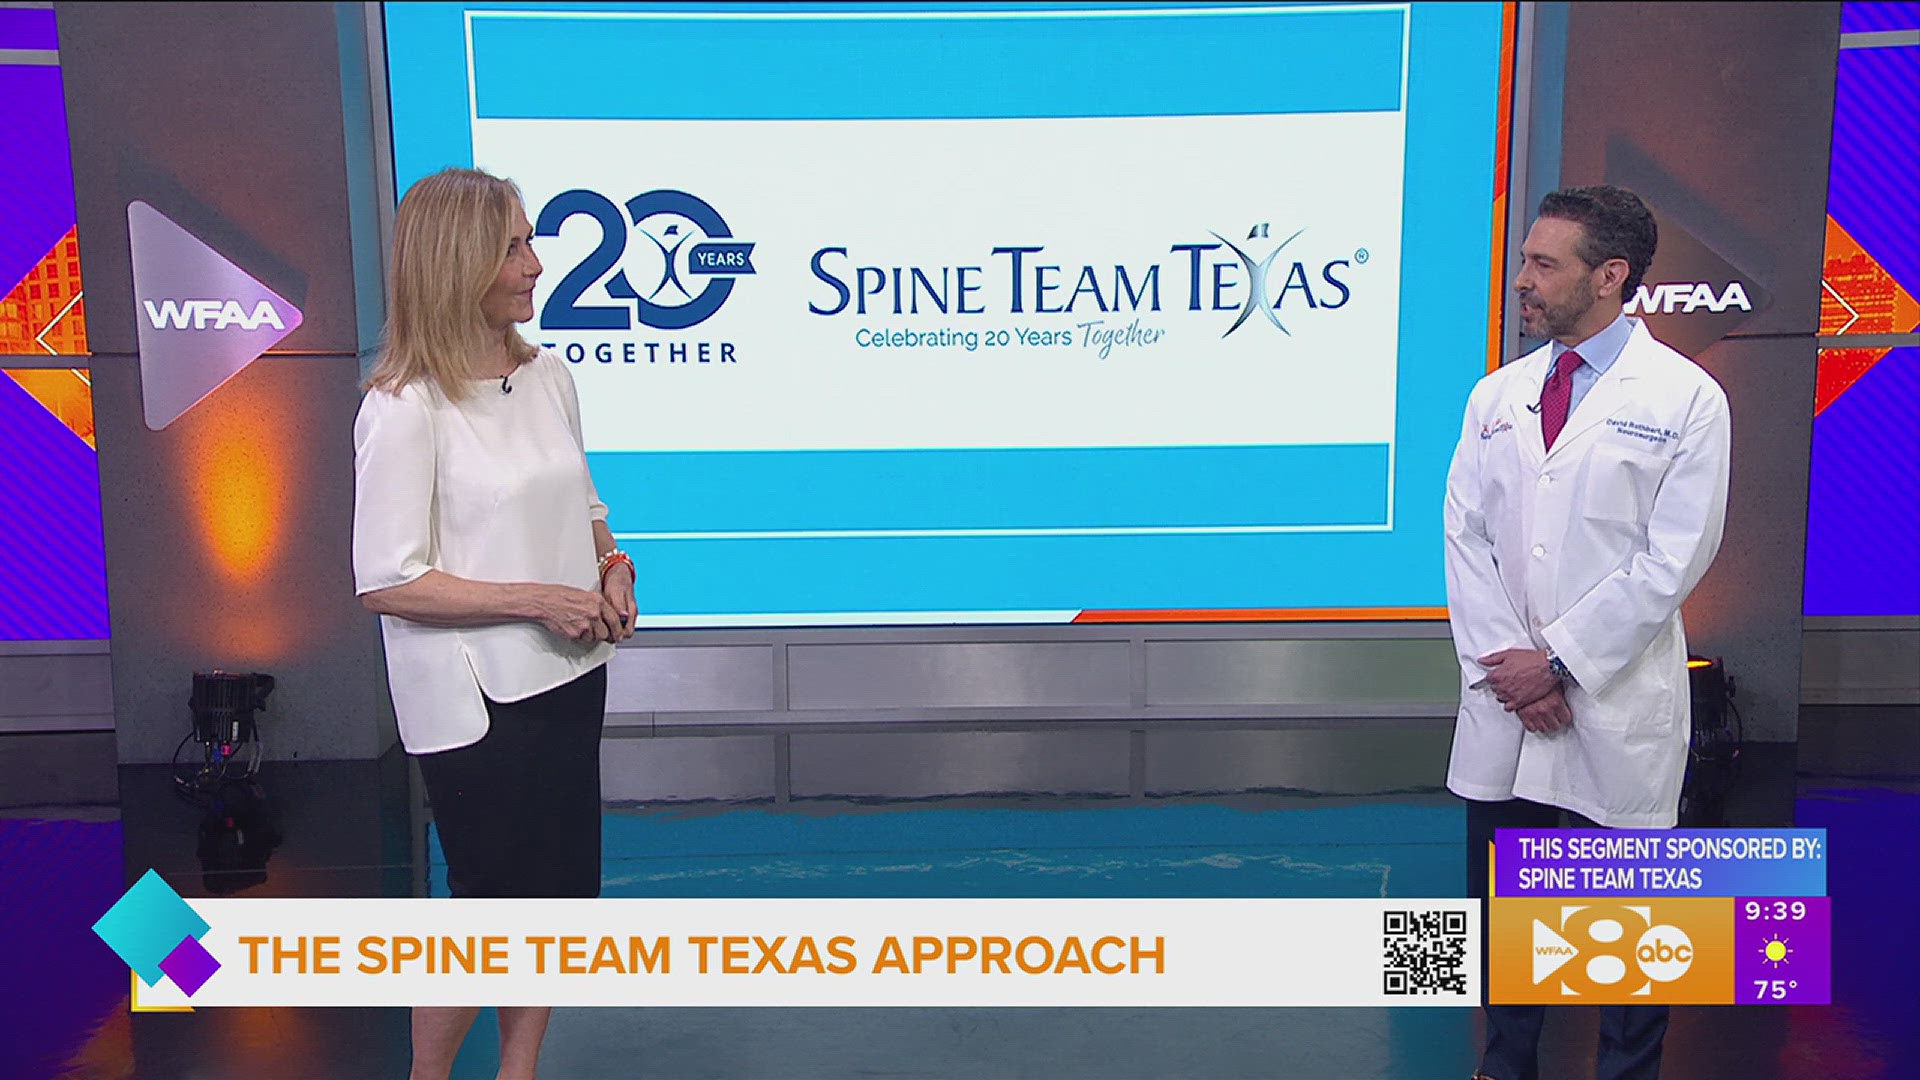 This segment is sponsored by: Spine Team Texas